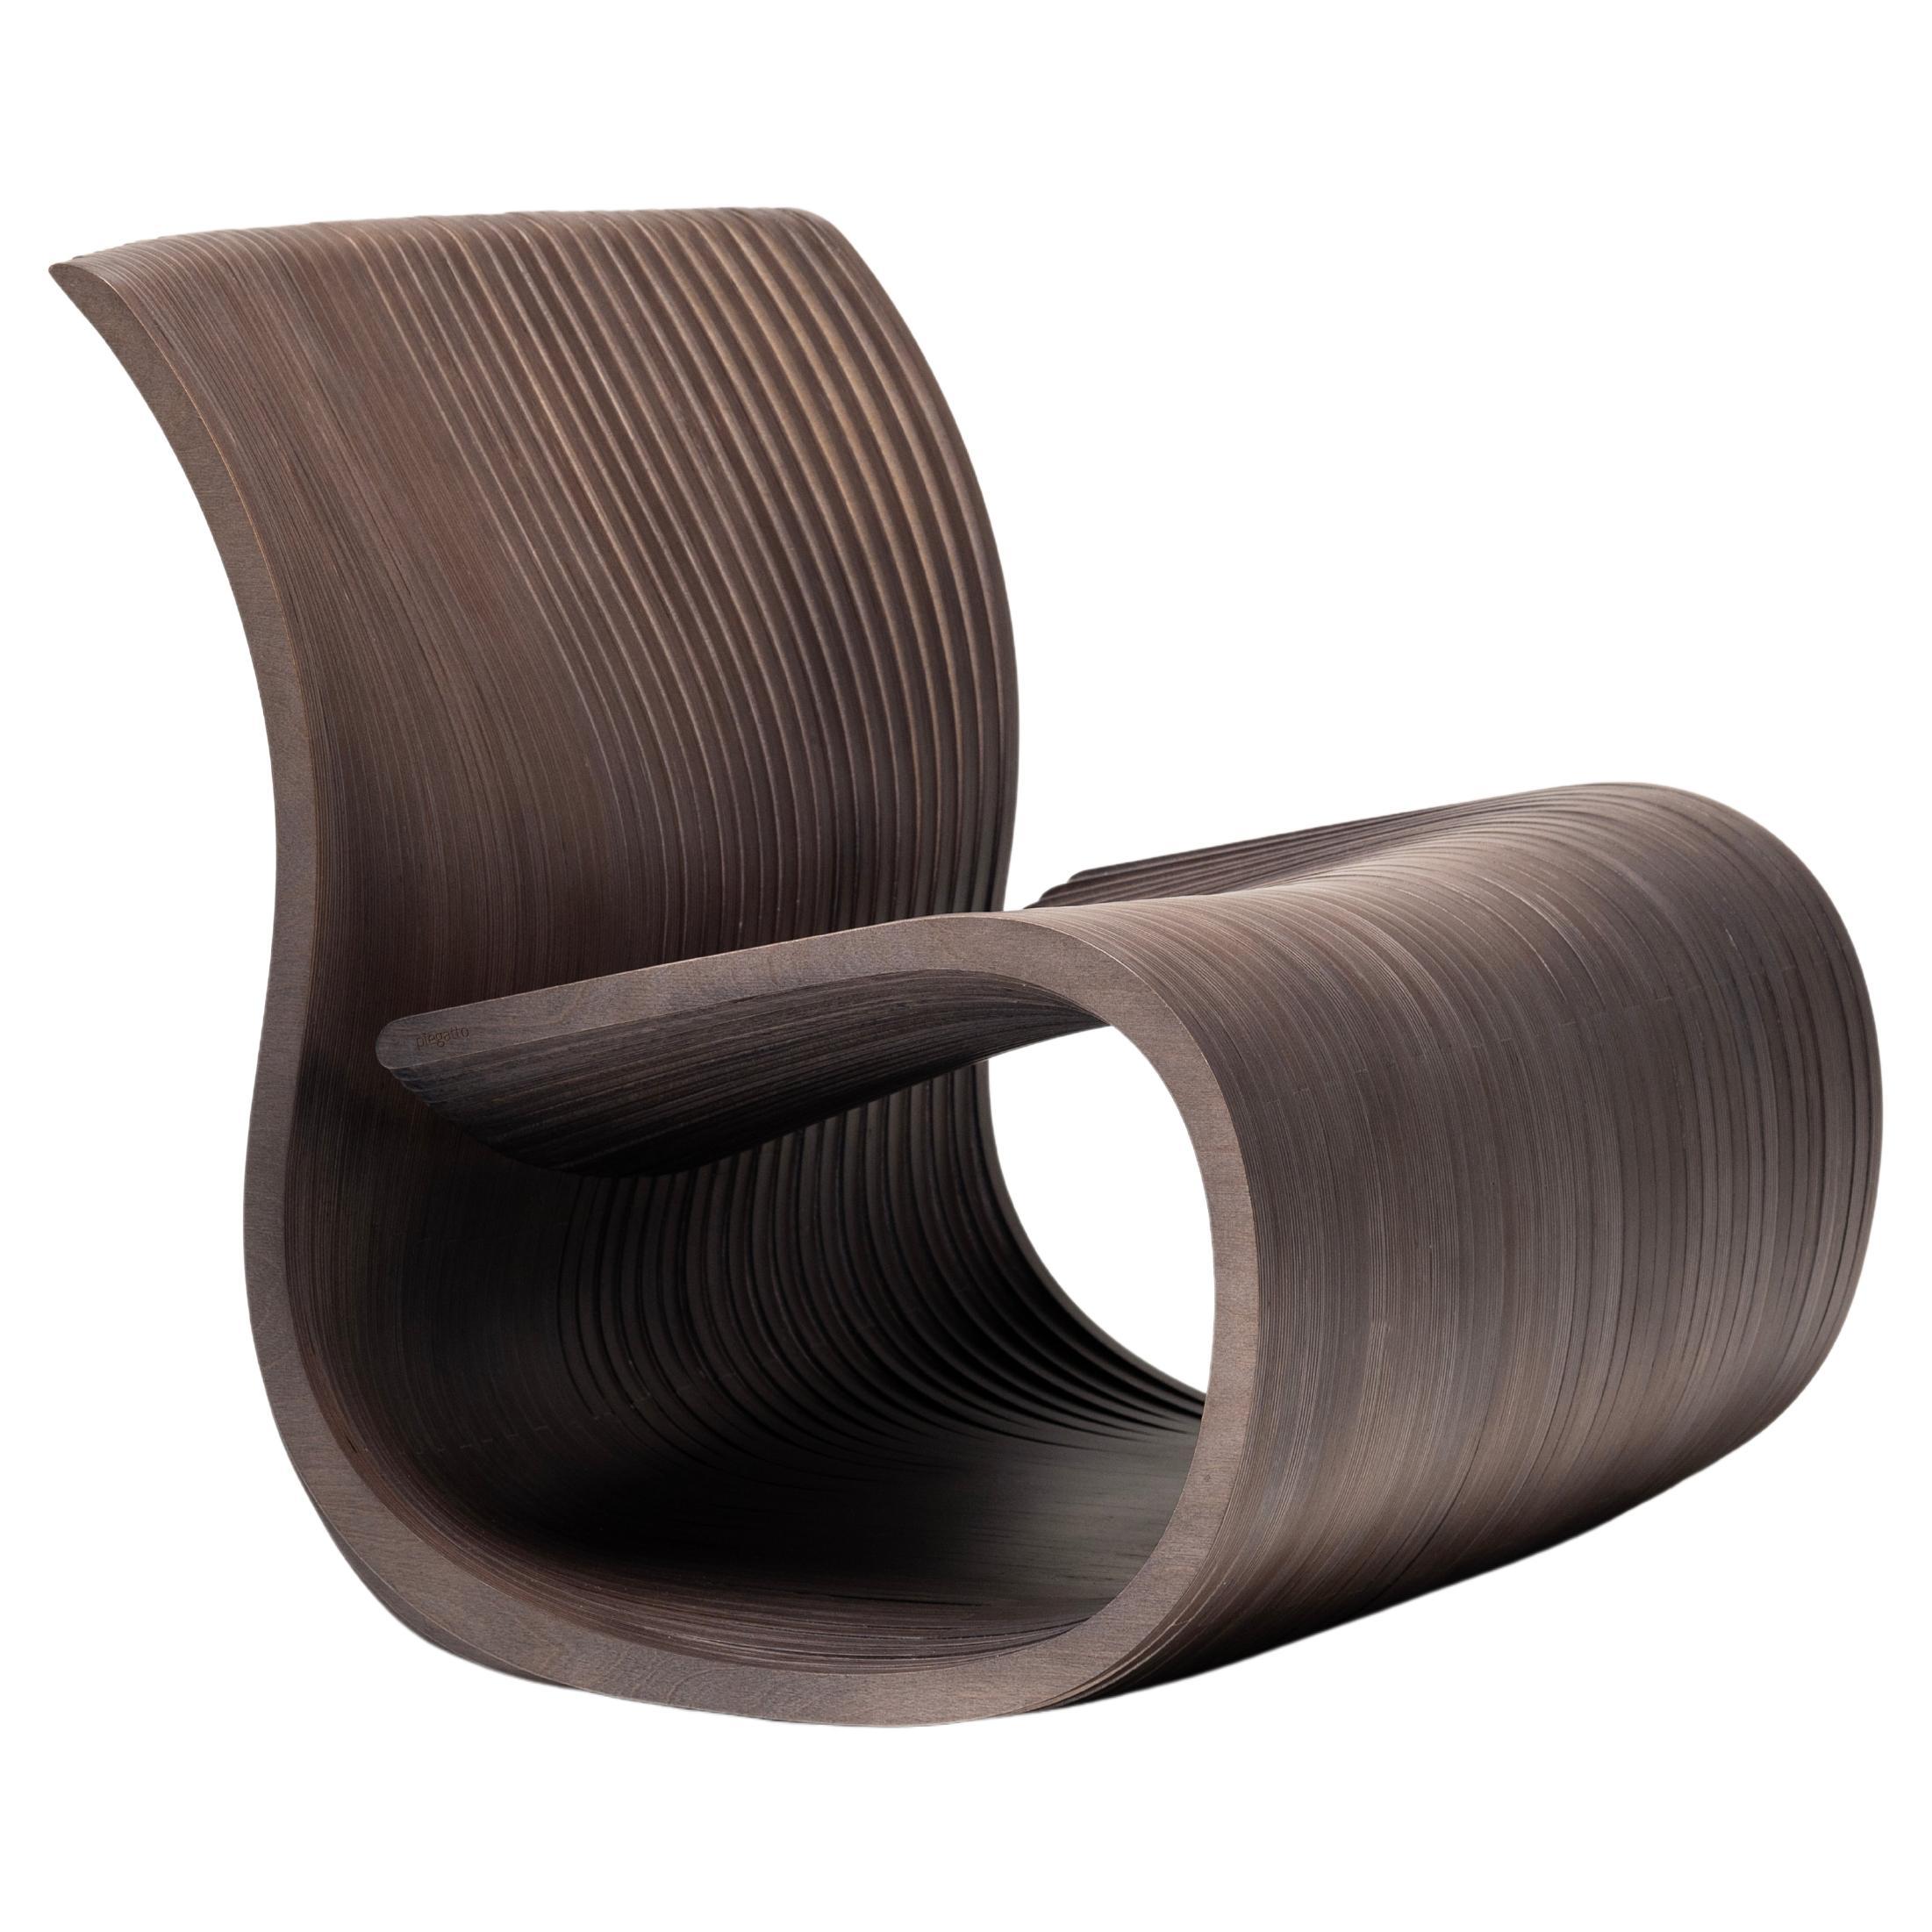 Riddle Chair by Piegatto, a Sculptural Contemporary Chair For Sale